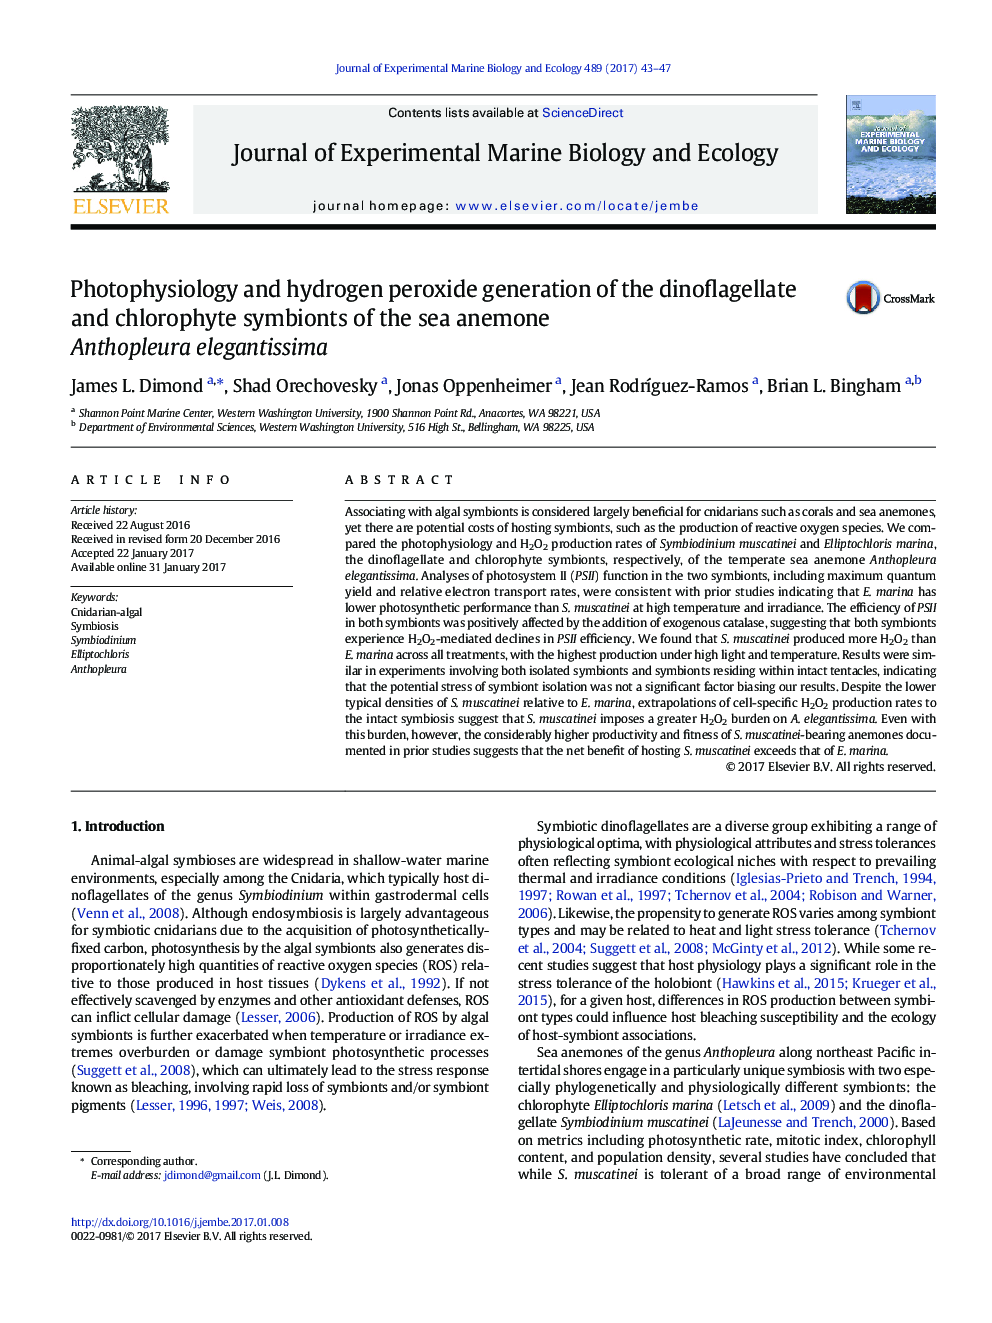 Photophysiology and hydrogen peroxide generation of the dinoflagellate and chlorophyte symbionts of the sea anemone Anthopleura elegantissima